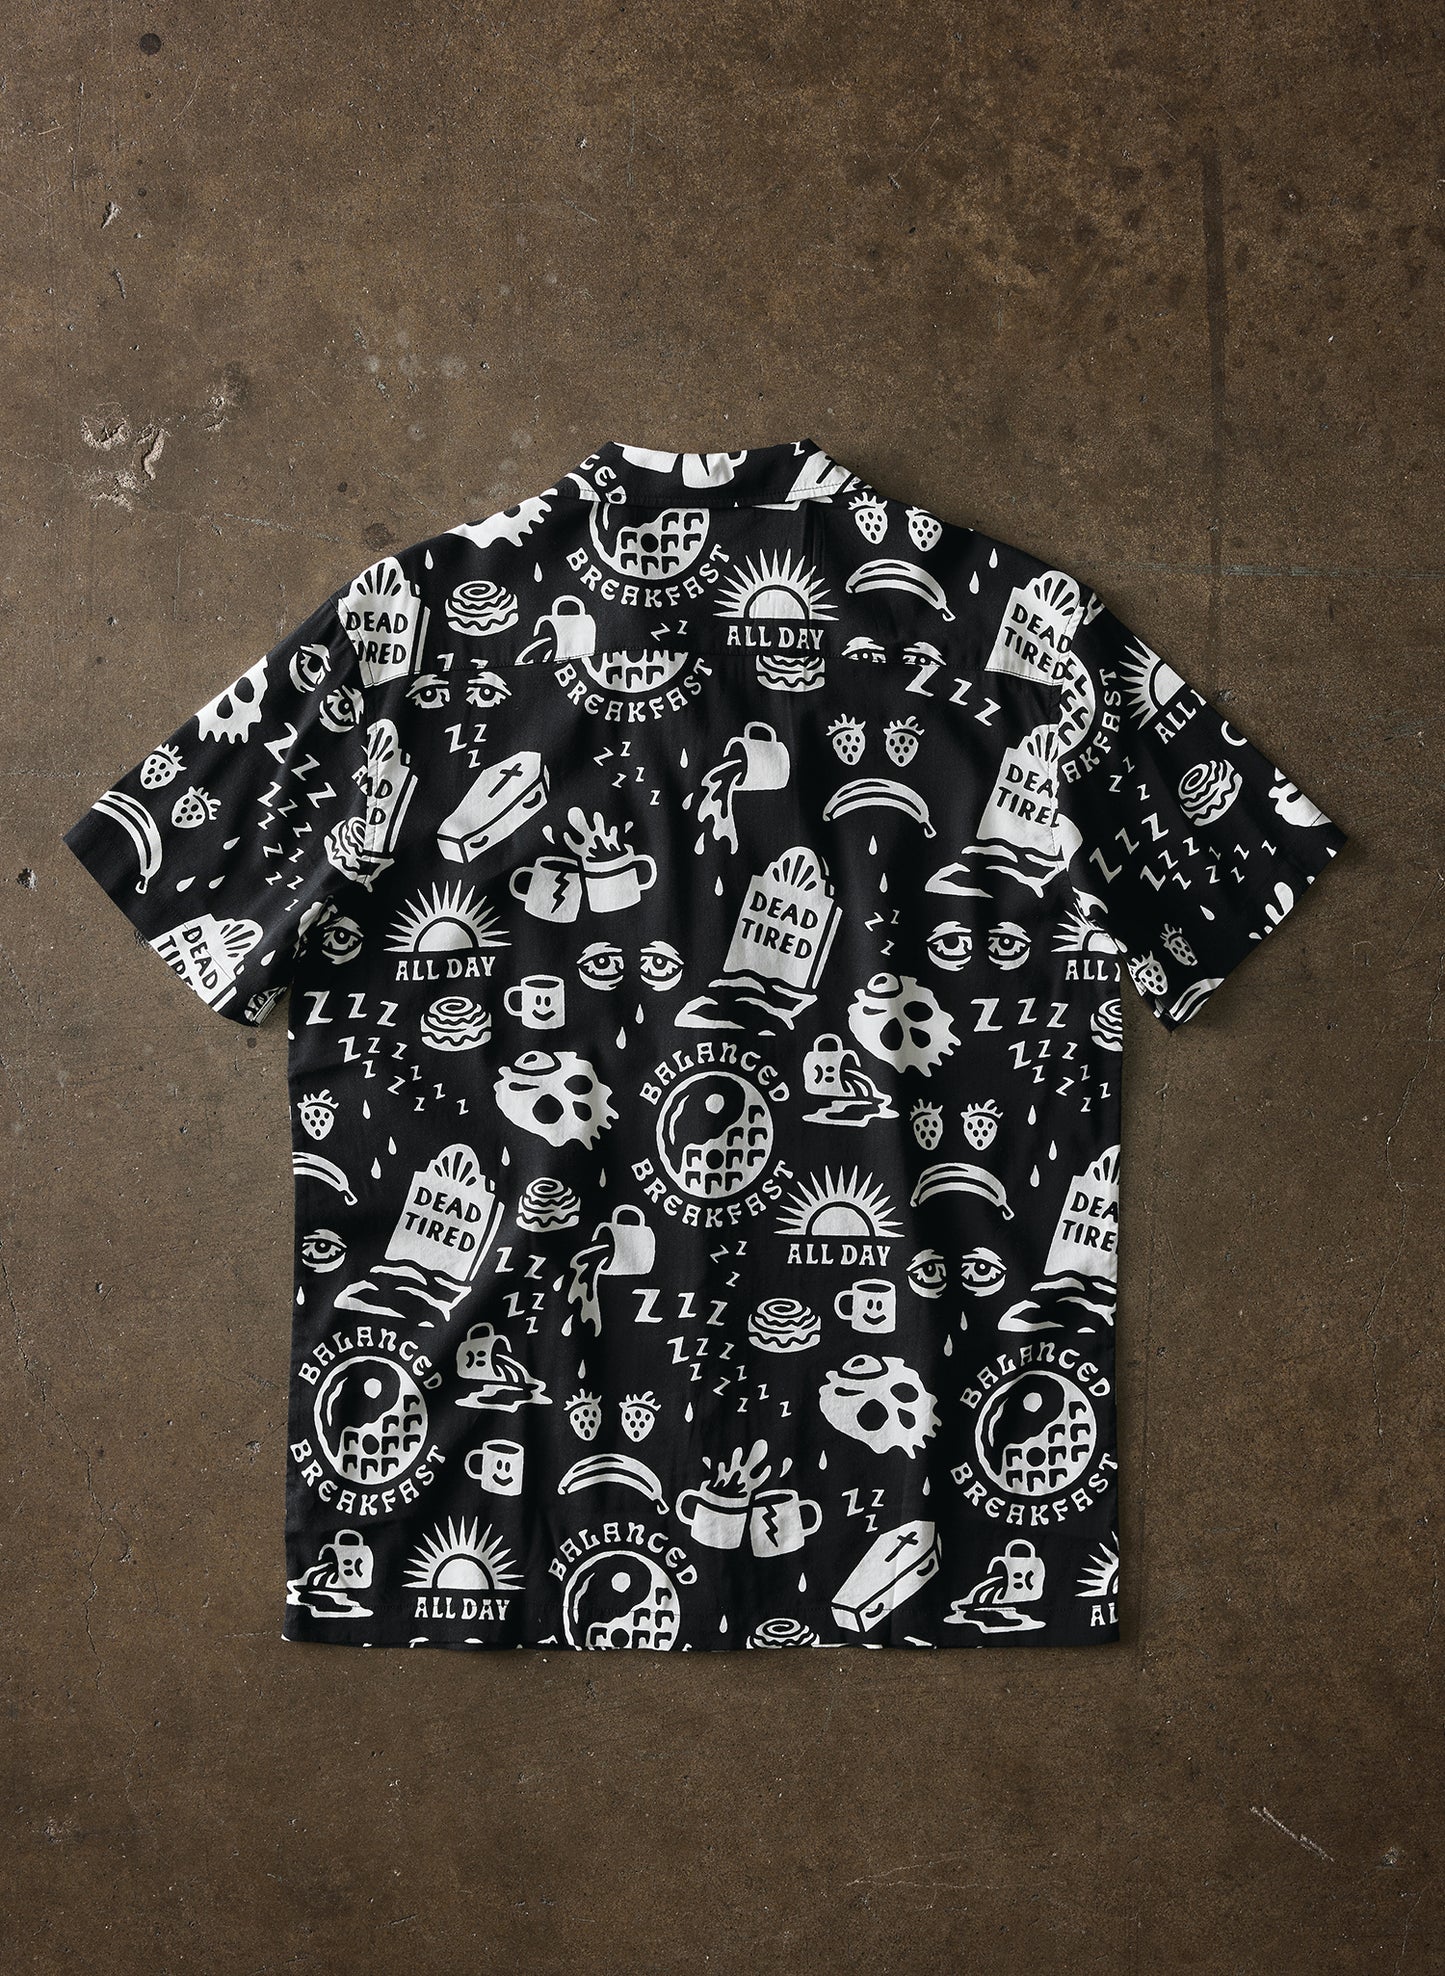 Pyknic | Dead Tired Vacation Casual Button-Up Shirt | Button Down Shirt with All Over Graphic Print, Black Coffee Shirt, Breakfast Lover Shirt,Best Foodie Shirt, Best Foodie Gift, Food Themed Apparel, Food Tattoo Flash, Always Tired Button Down Shirt, Cool Button Up Shirts